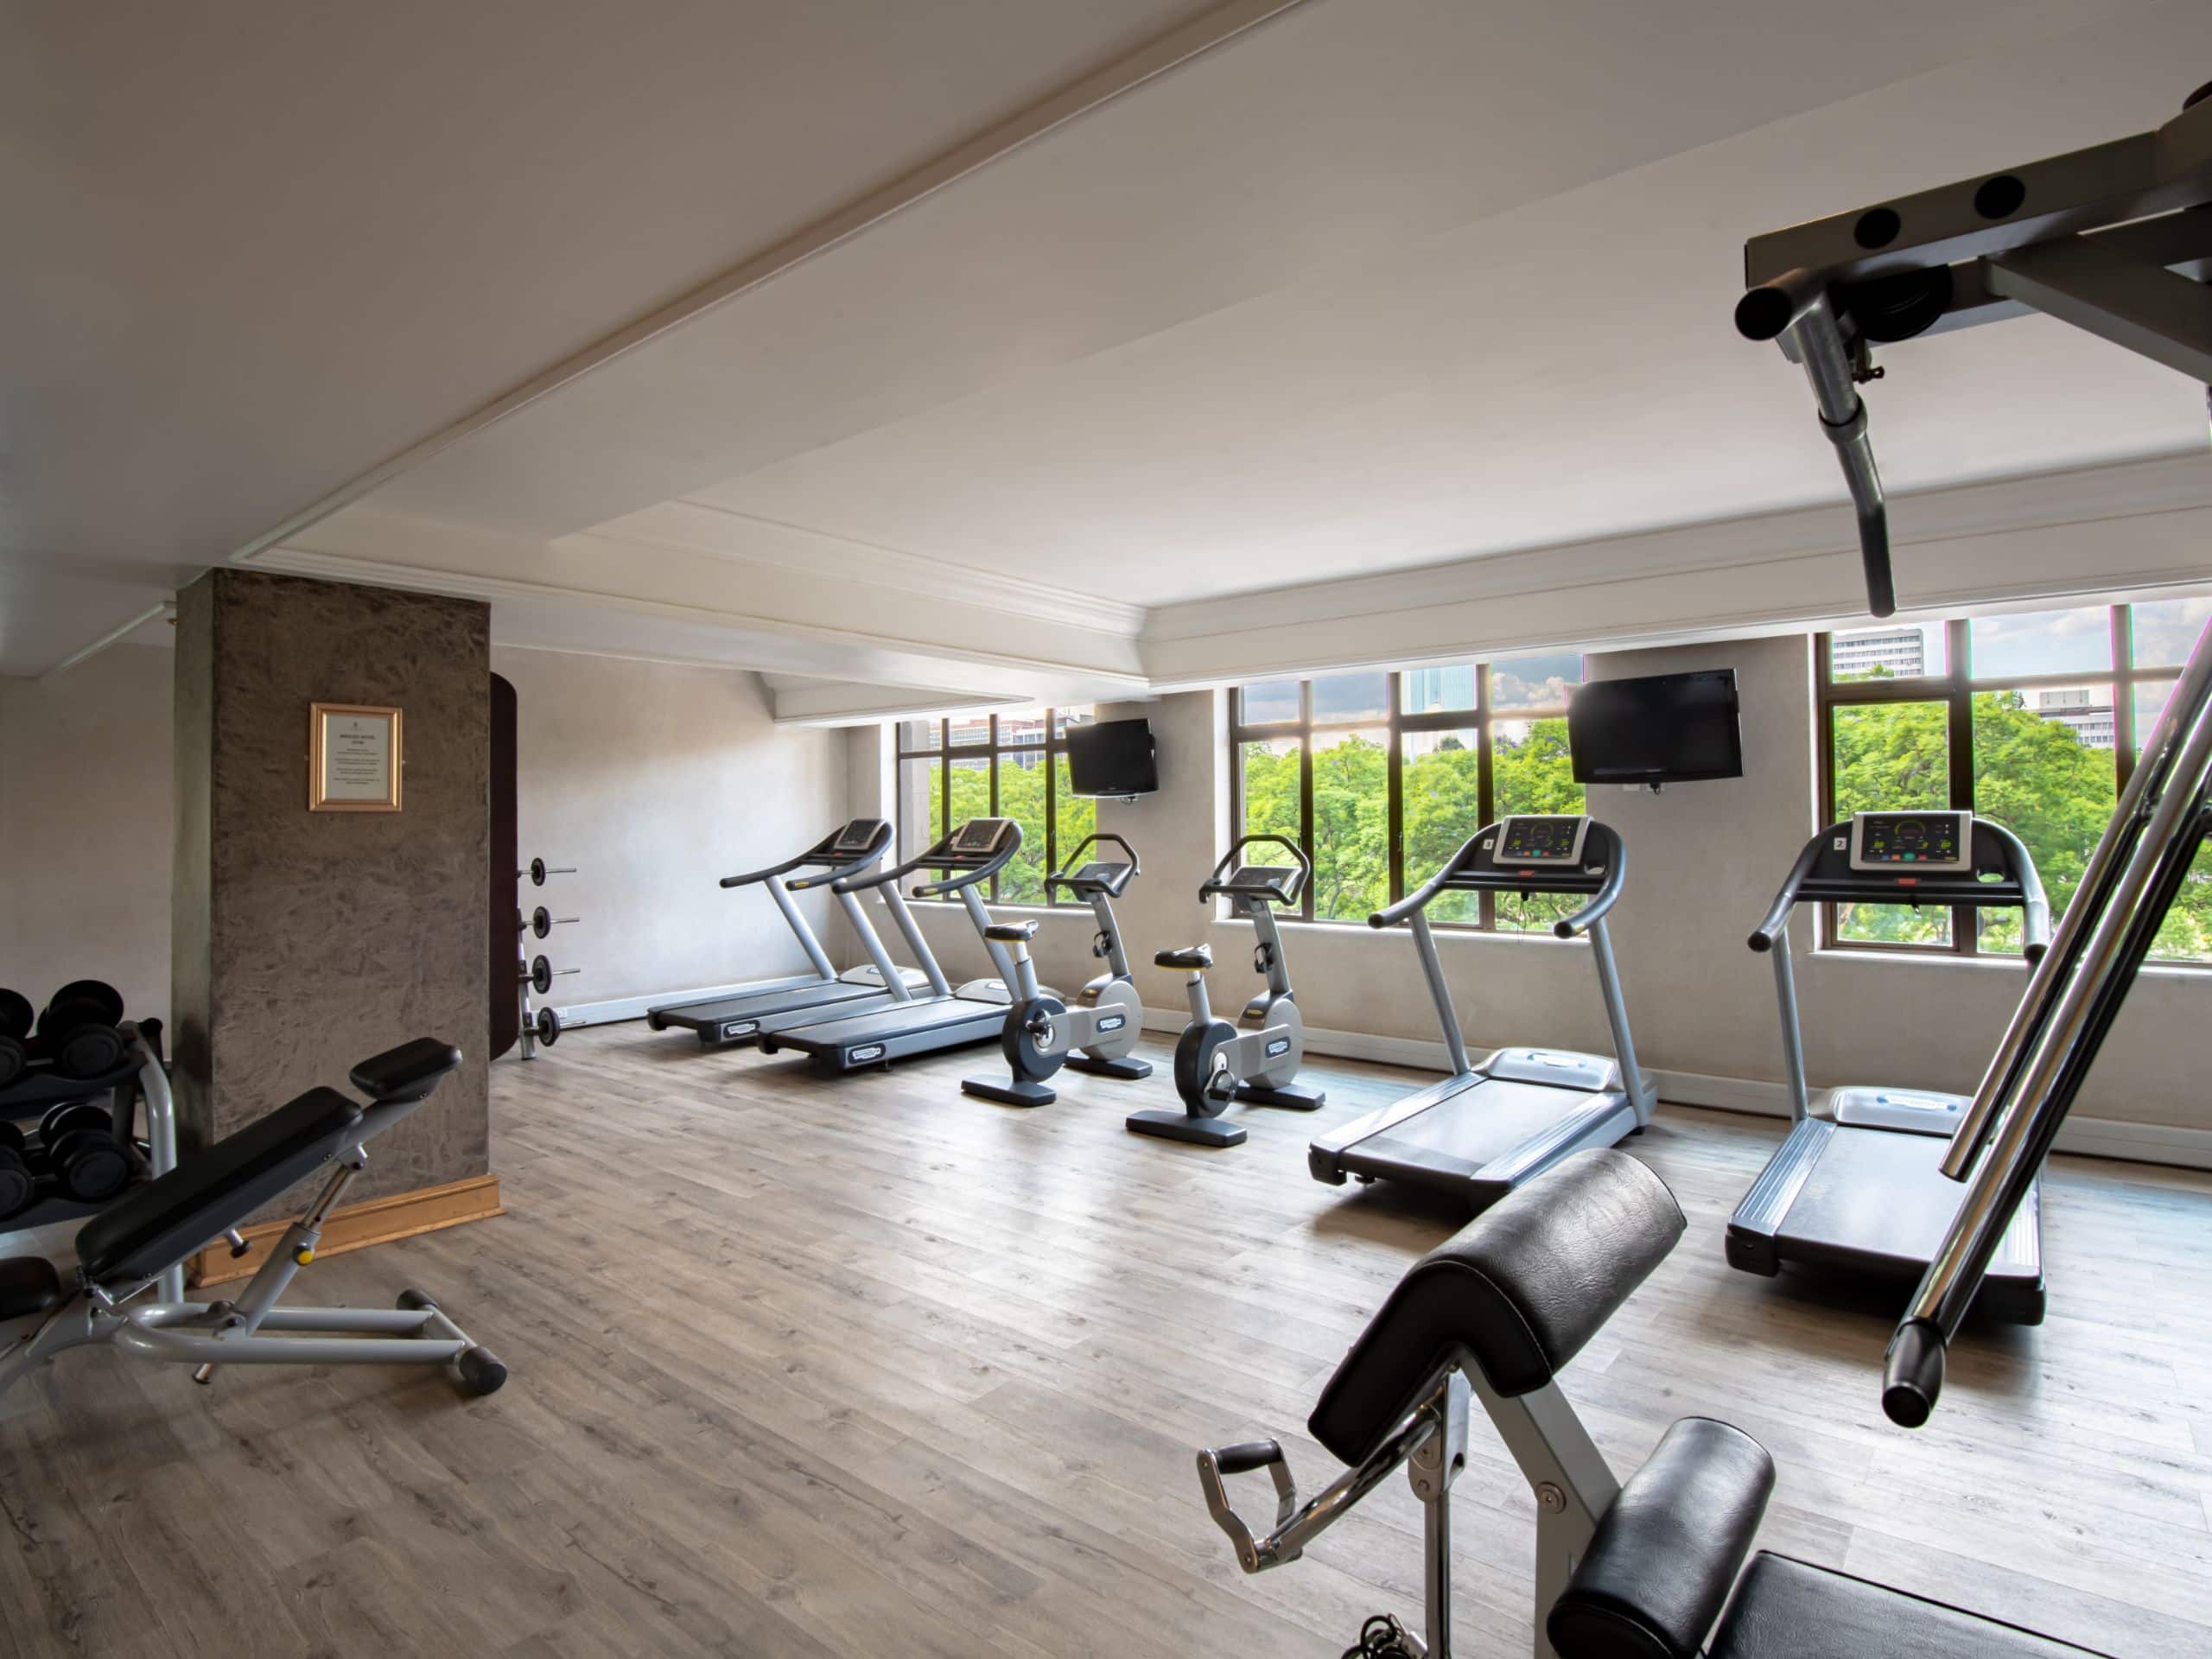 A luxury hotel gym at Hyatt Regency Harare The Meikles, featuring treadmills and a large window offering stunning views.